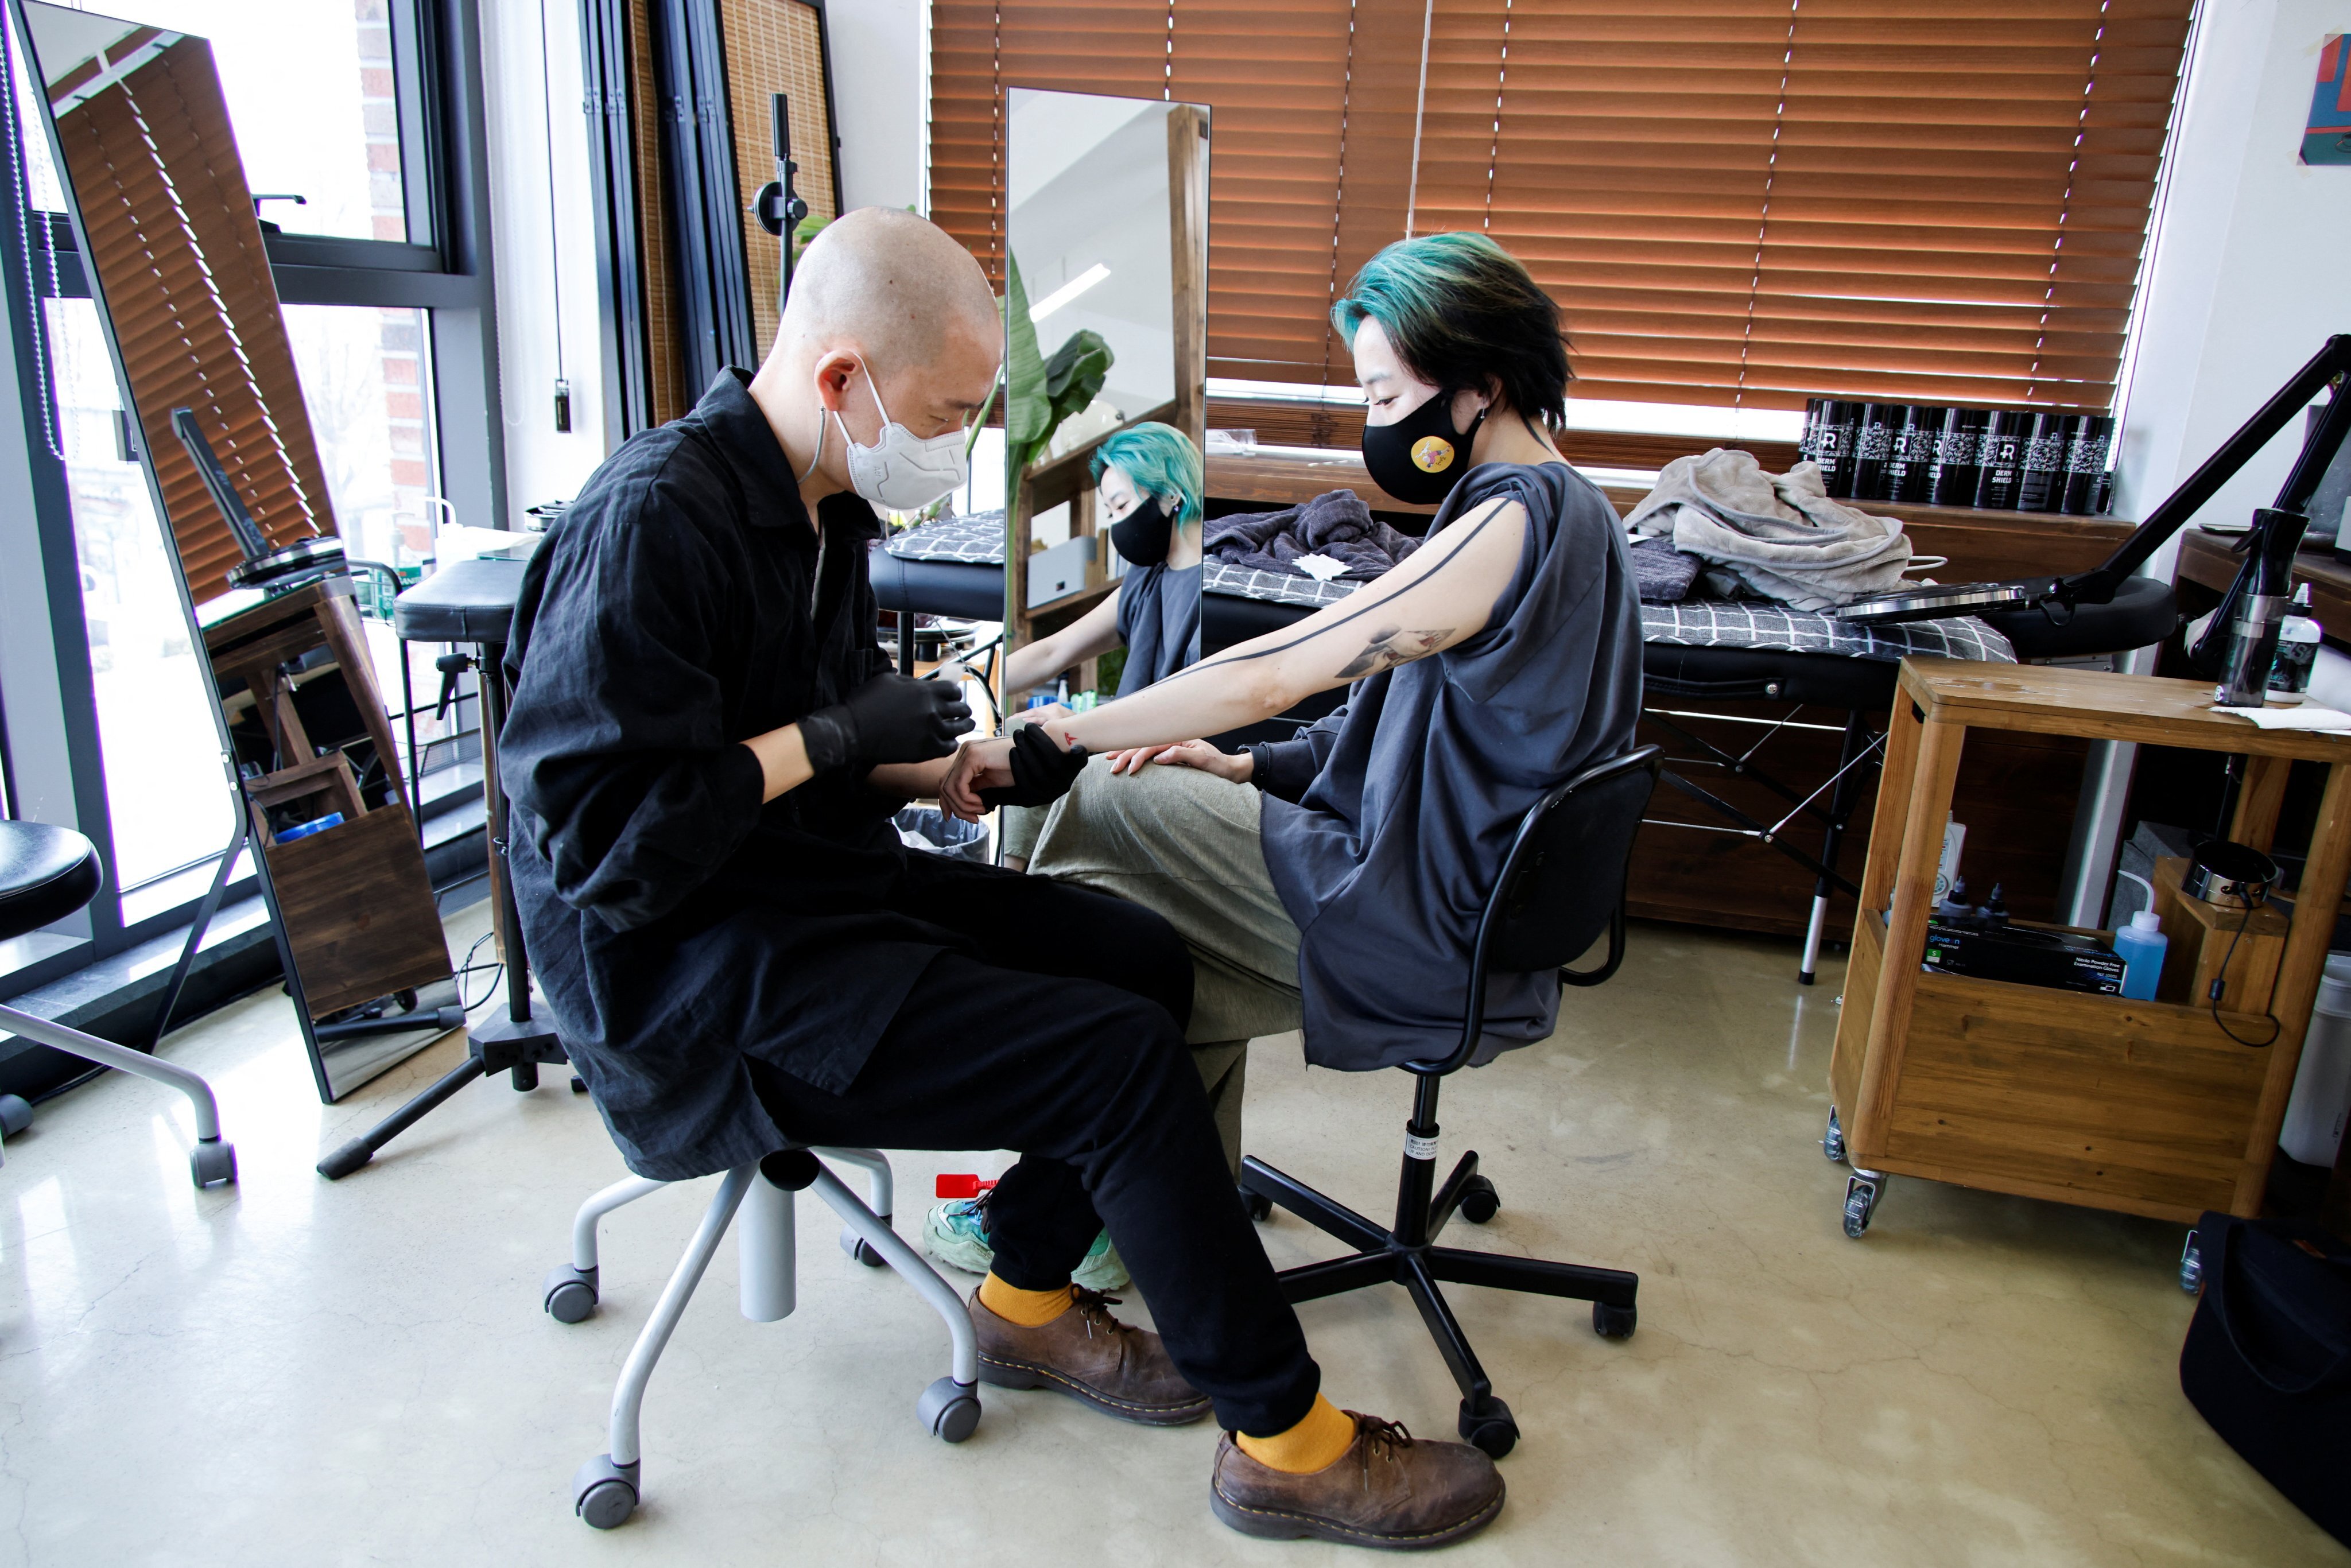 Tattooist Kim Do-yoon attends to a customer in his studio in Seoul. Photo: Reuters